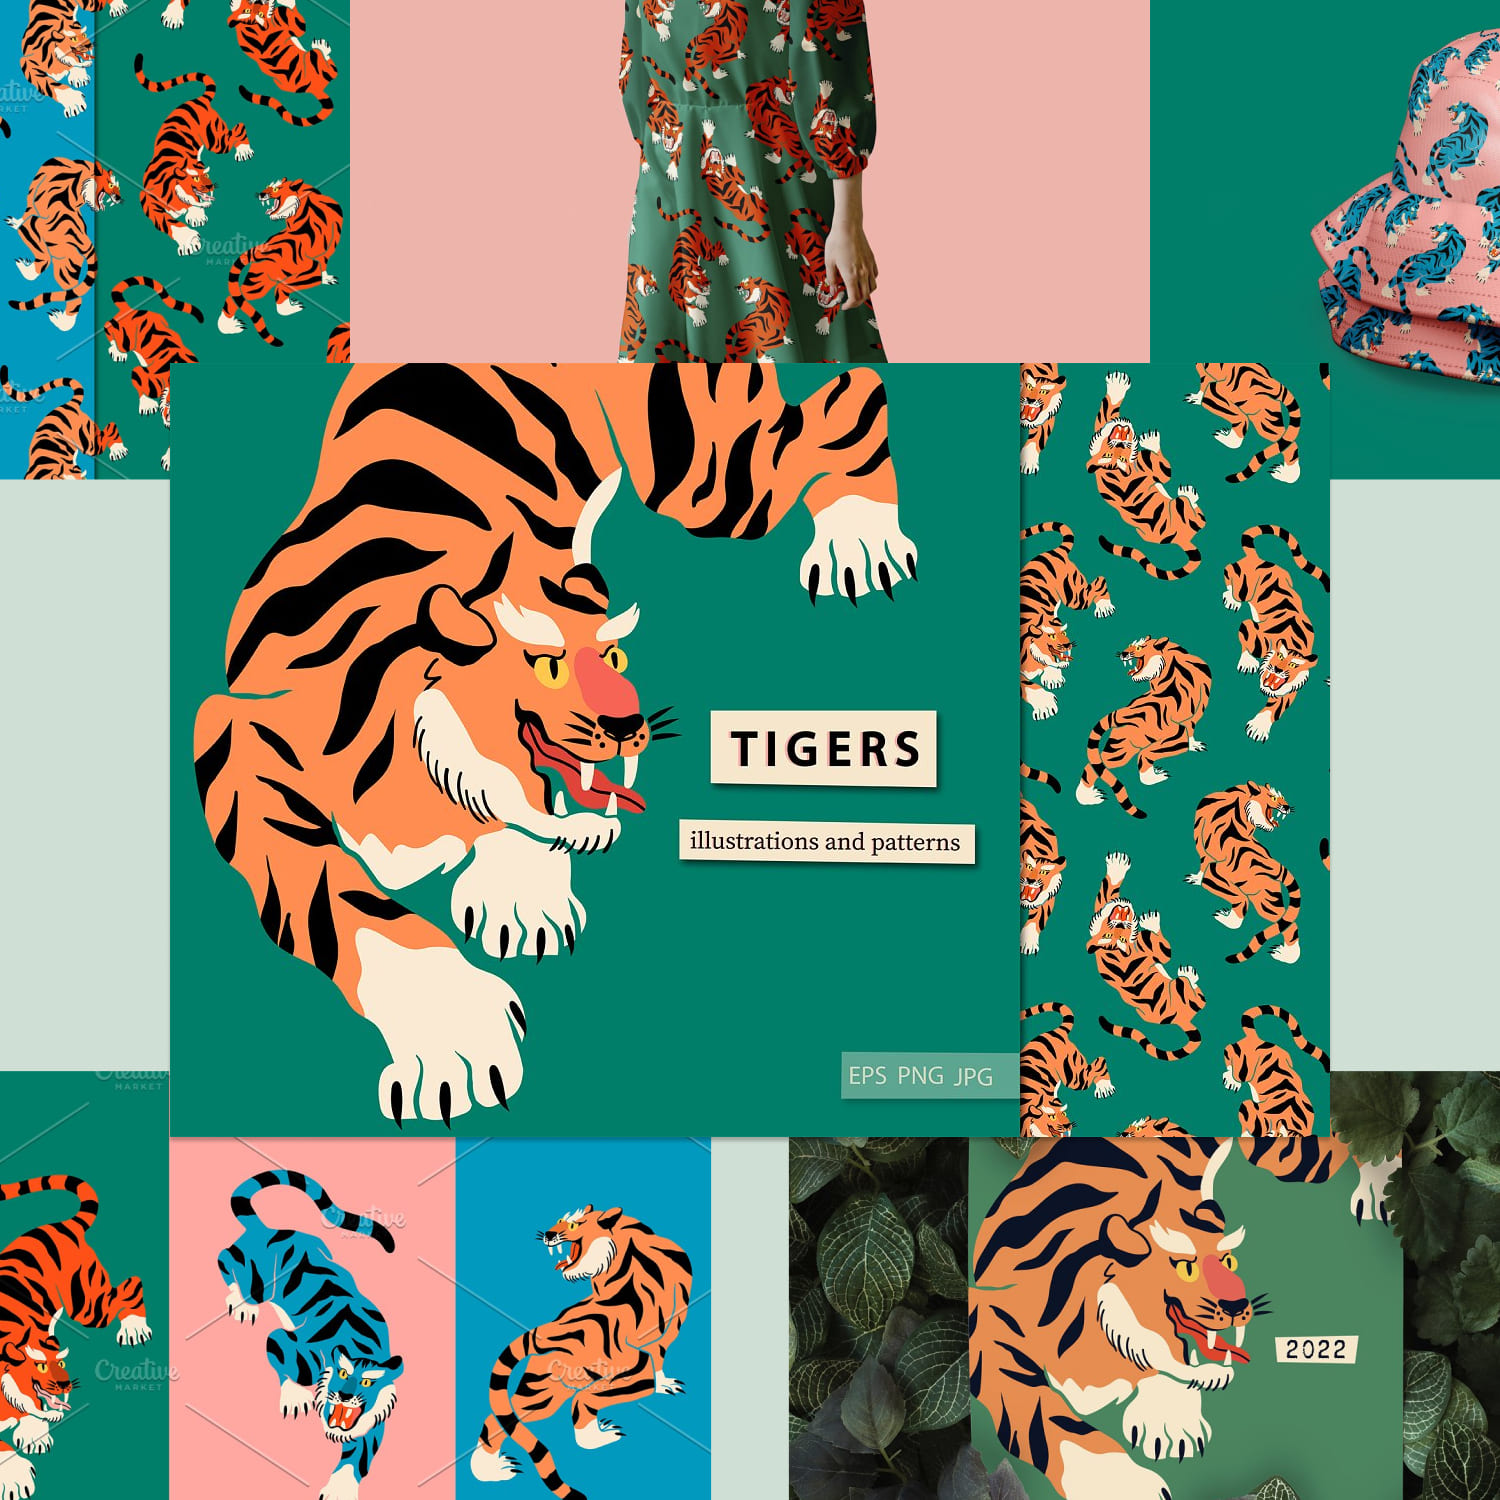 Tigers cover.